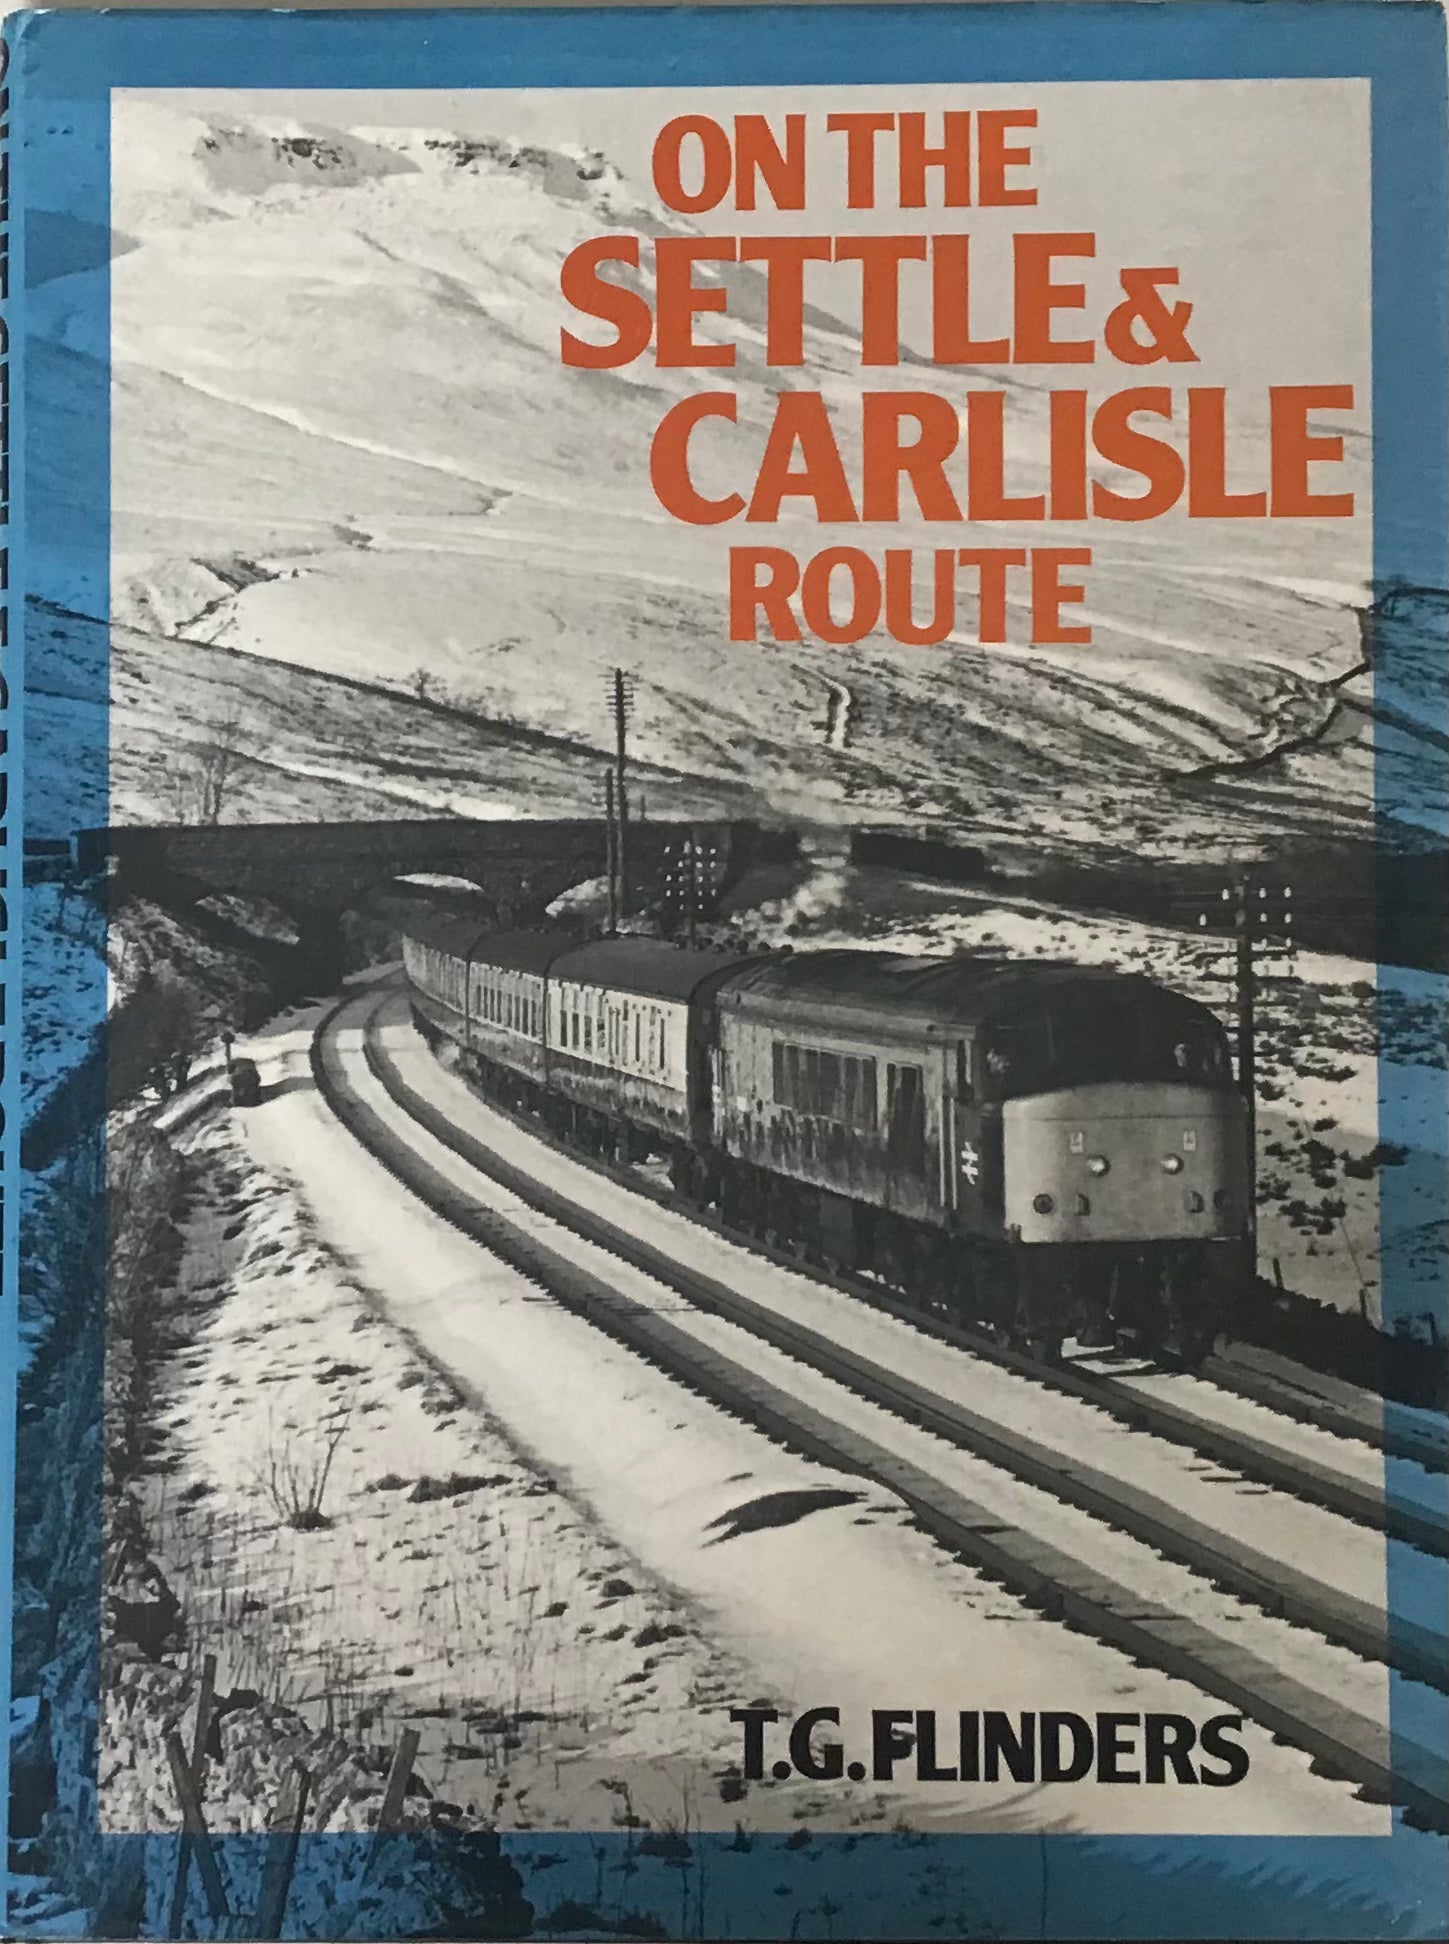 On the Settle & Carlisle Route by T.G. Flinders - Chester Model Centre